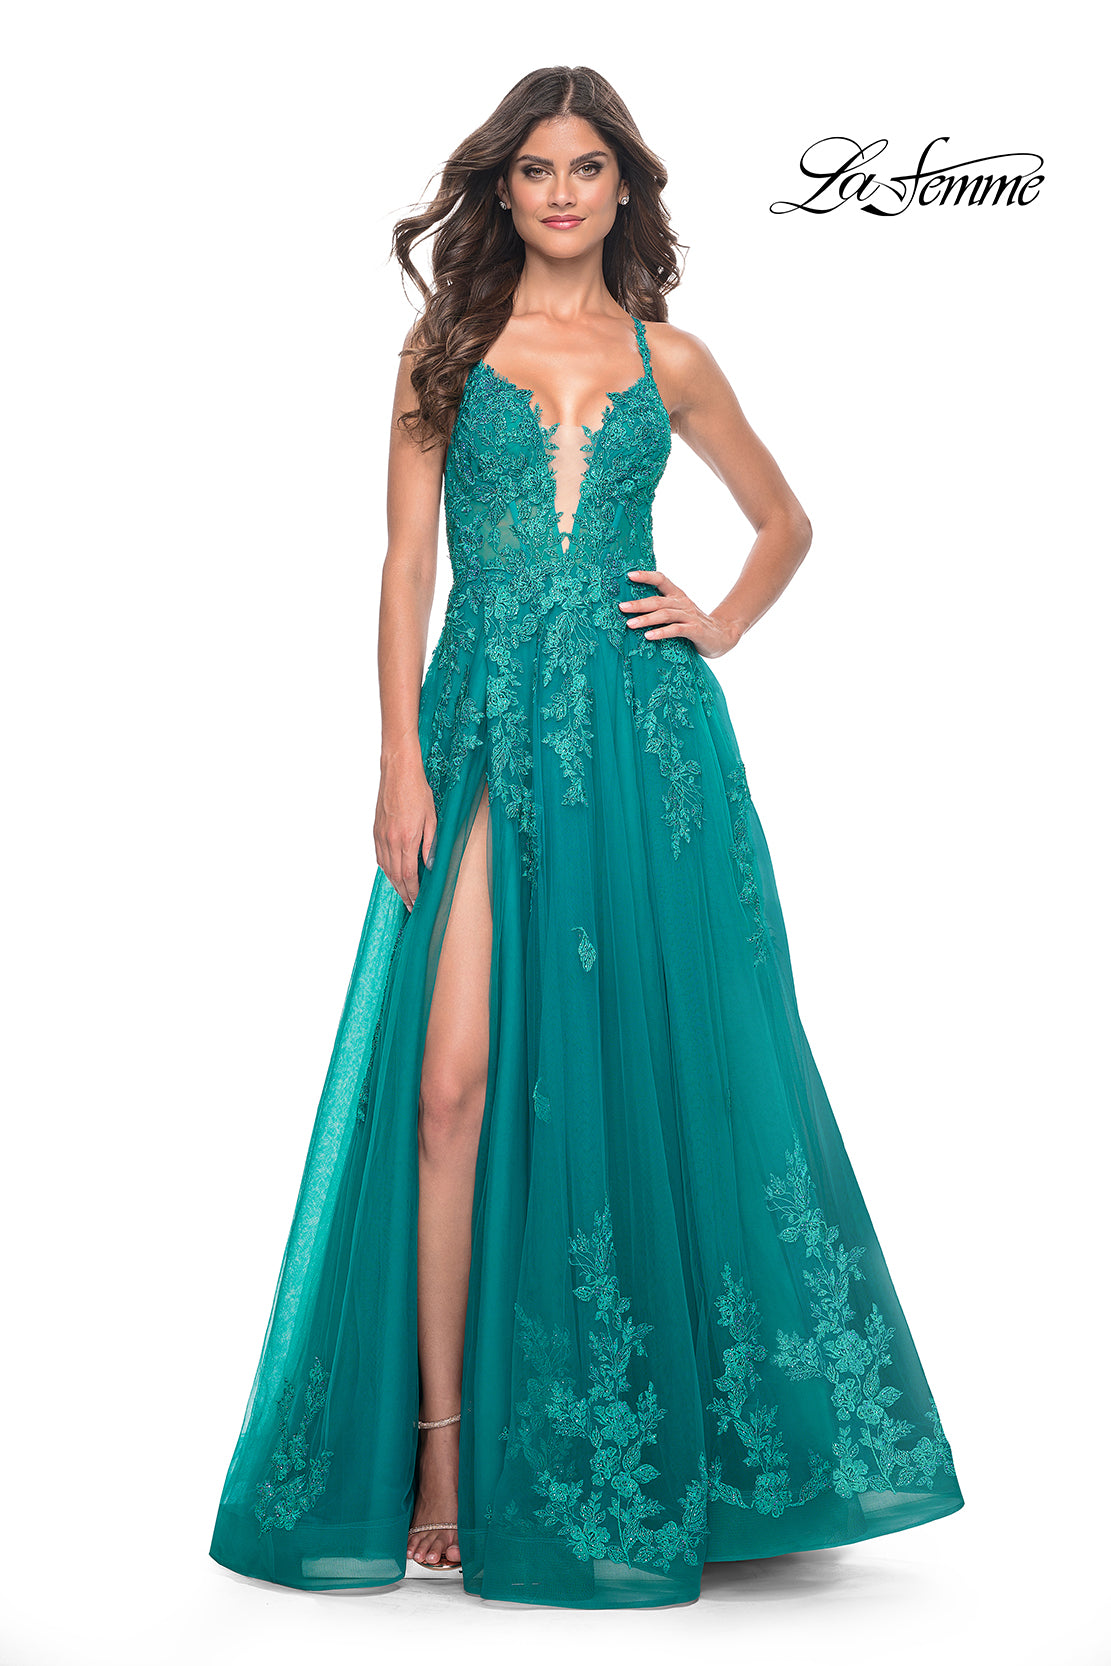 La-Femme-32062-Plunging-Neckline-Criss-Cross-Back-Corset-Lace-Tulle-A-Line-Teal-Evening-Dress-B-Chic-Fashions-Prom-Dress